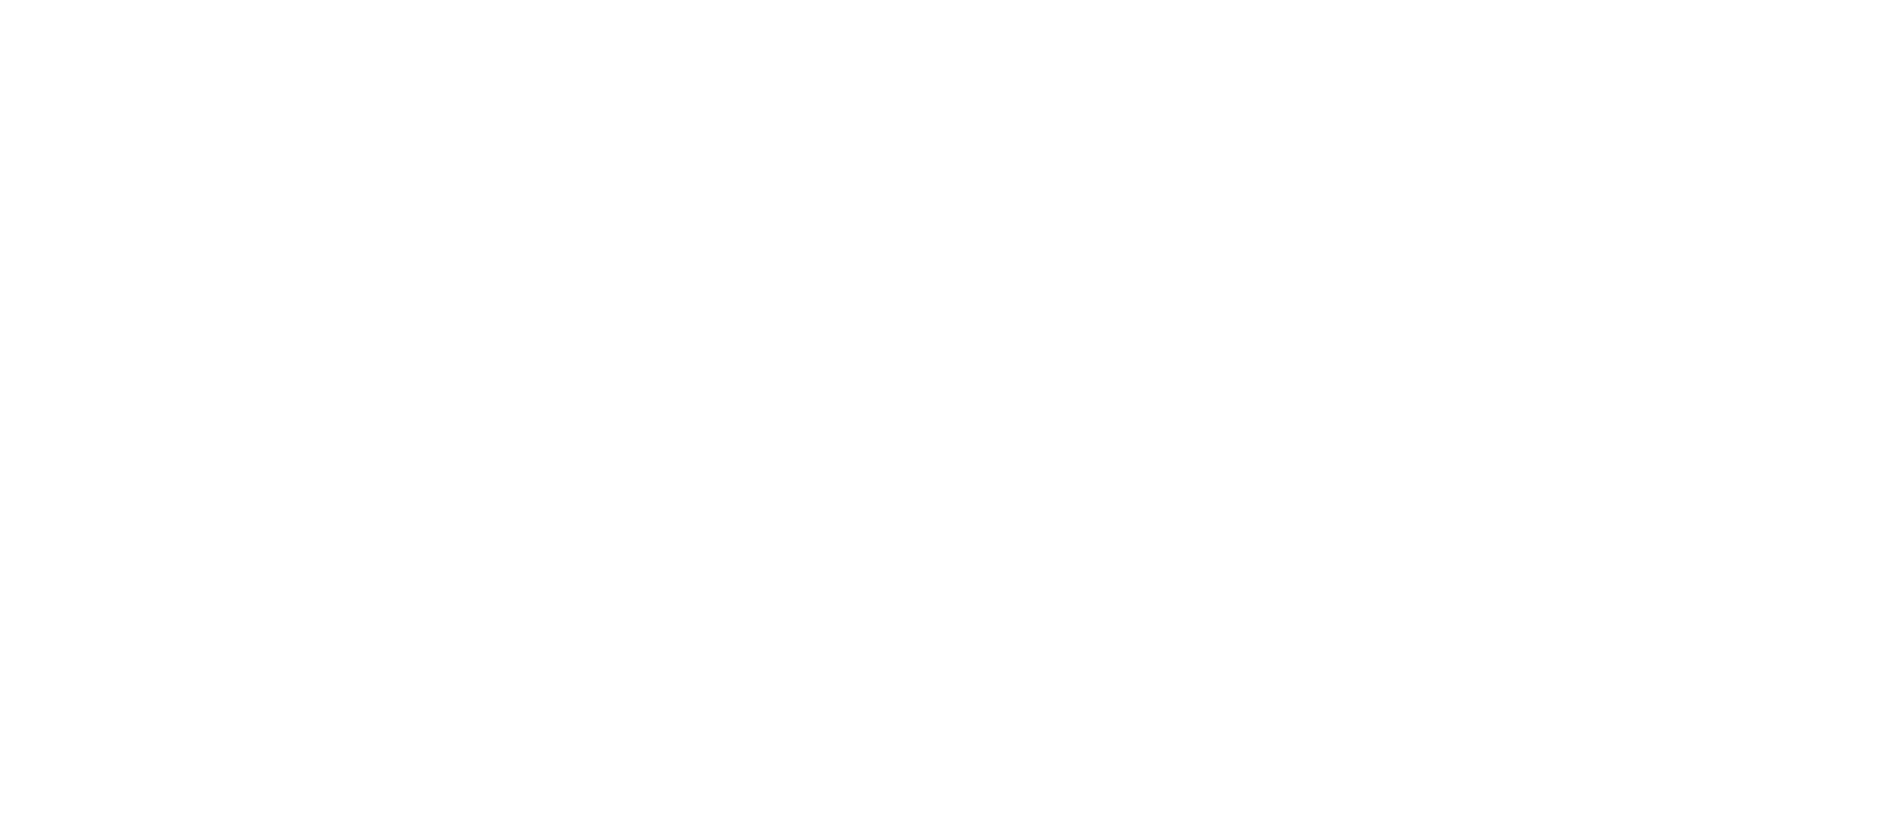 Baknd | Business Operations & Automations System